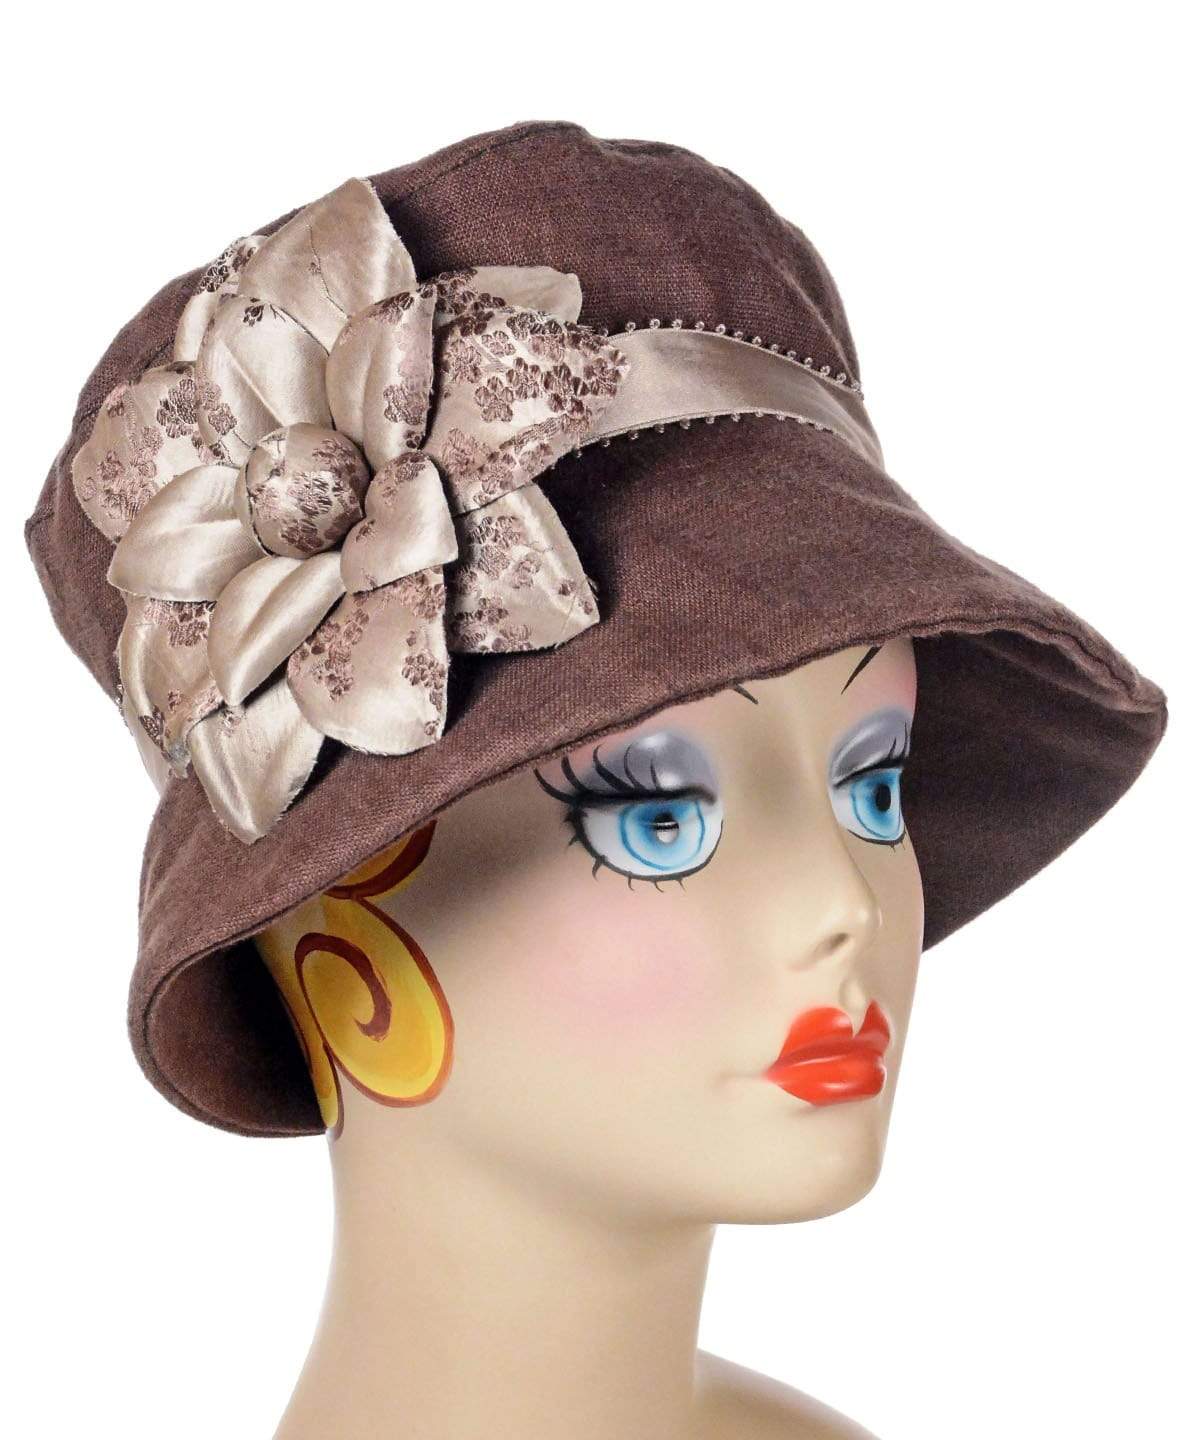 Molly Bucket Style Hat in Chocolate Linen with Champagne Pico Satin Band and  Custom  Large Kimono Flower | Handmade By Pandemonium Millinery in Seattle WA